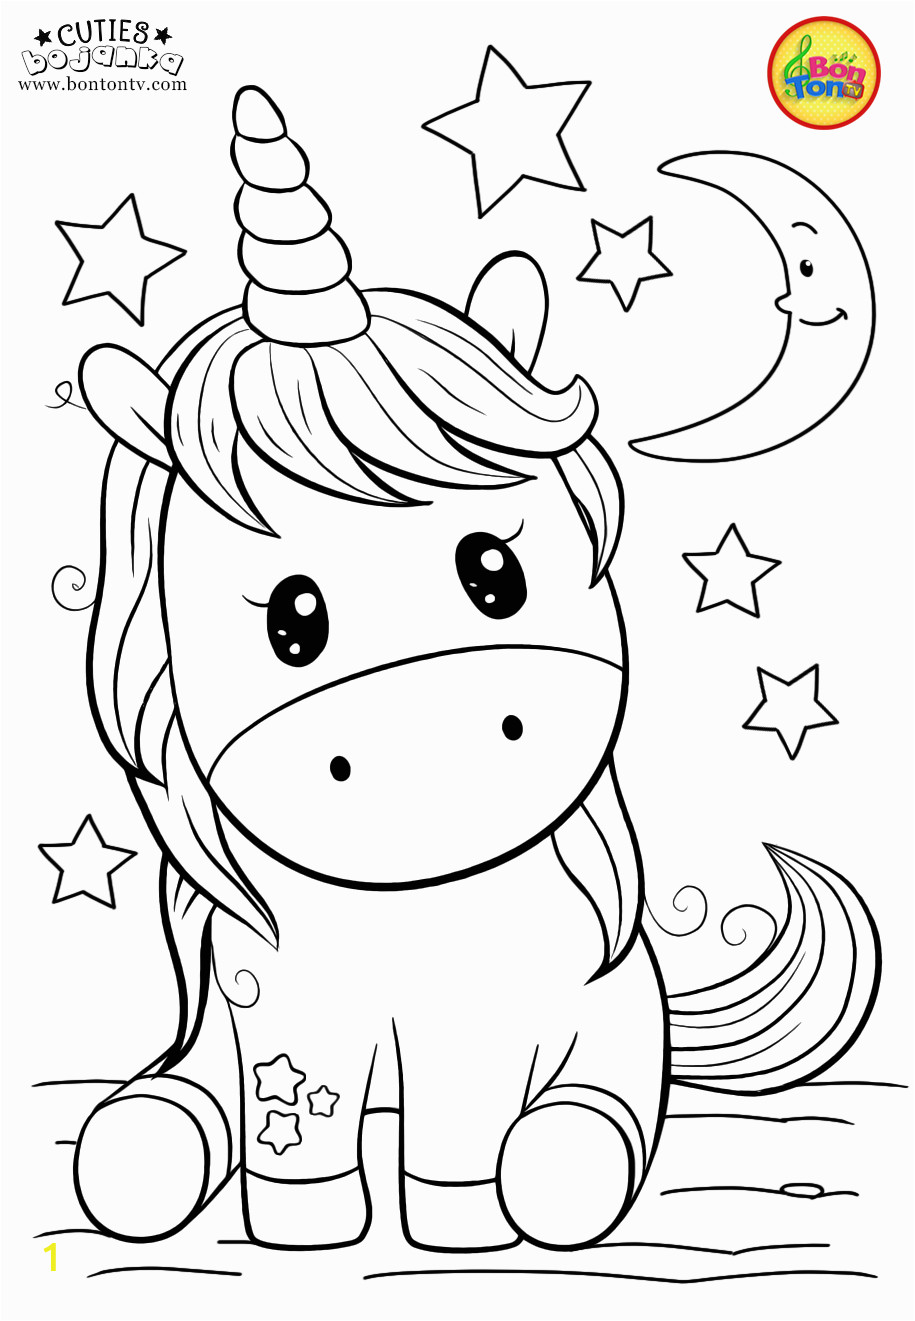 Coloring Pages Printable for Preschoolers Cuties Coloring Pages for Kids Free Preschool Printables